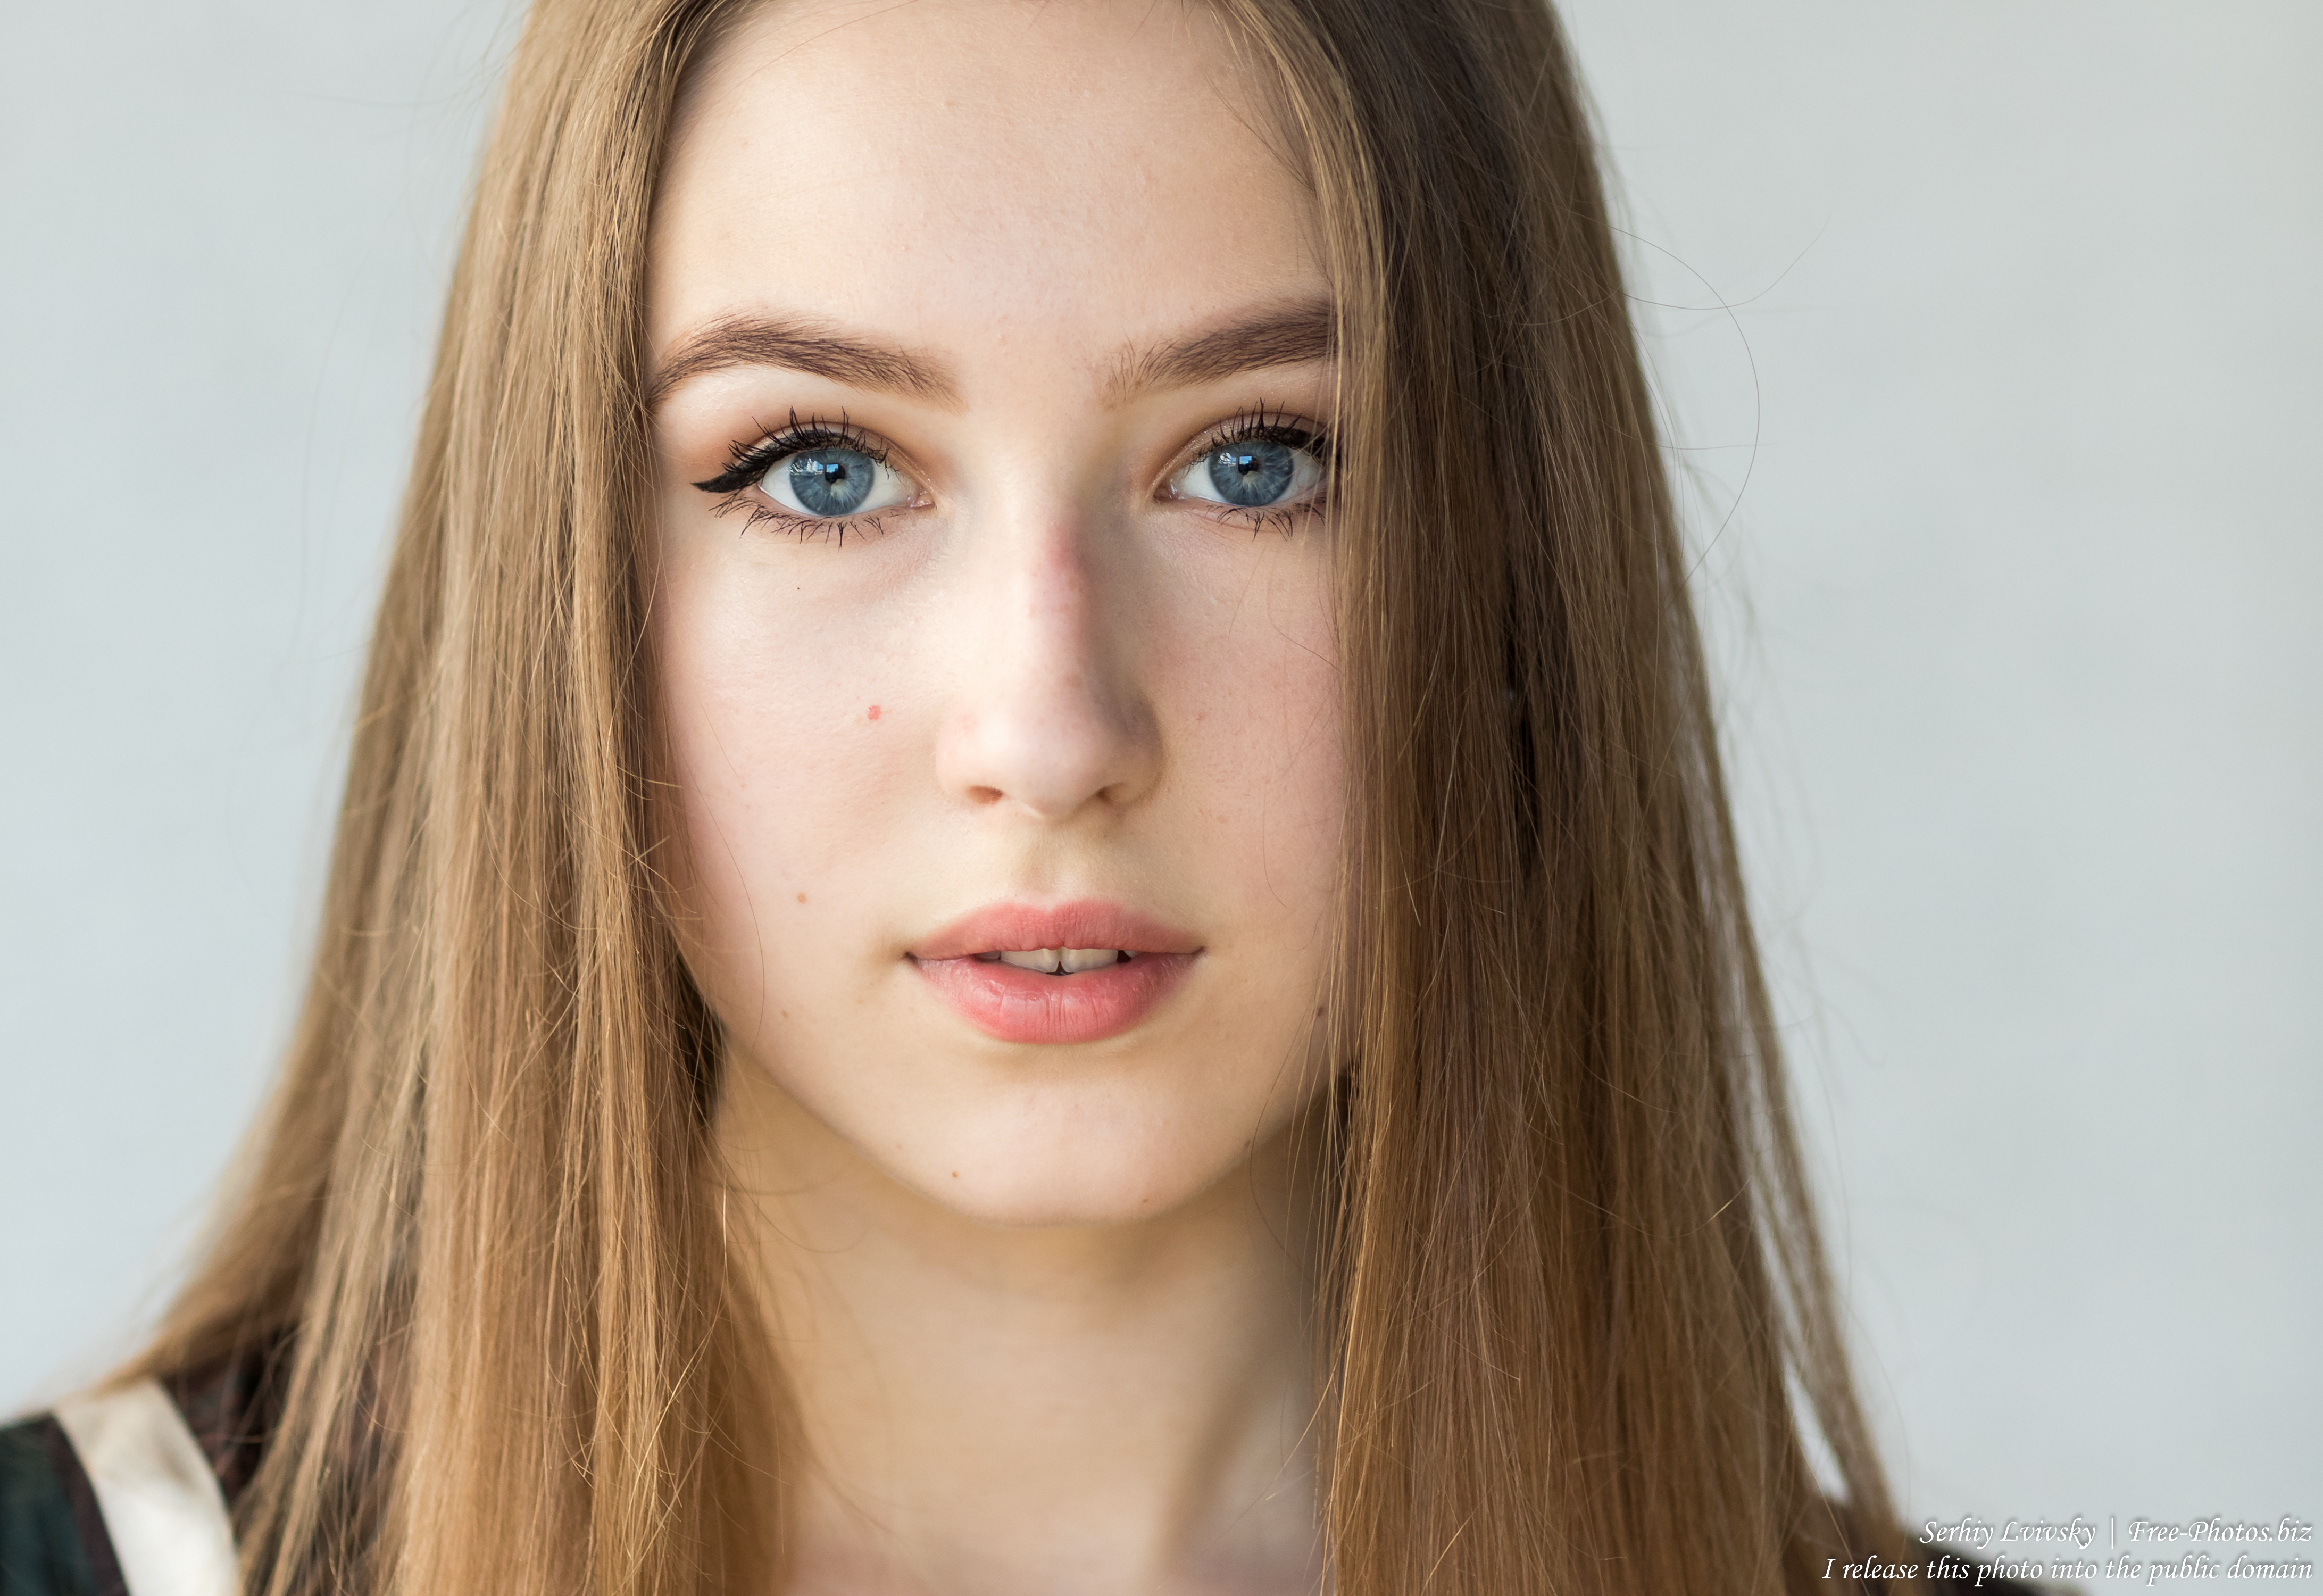 Vika - a 17-year-old girl with blue eyes and natural fair hair photographed in June 2019 by Serhiy Lvivsky, picture 6